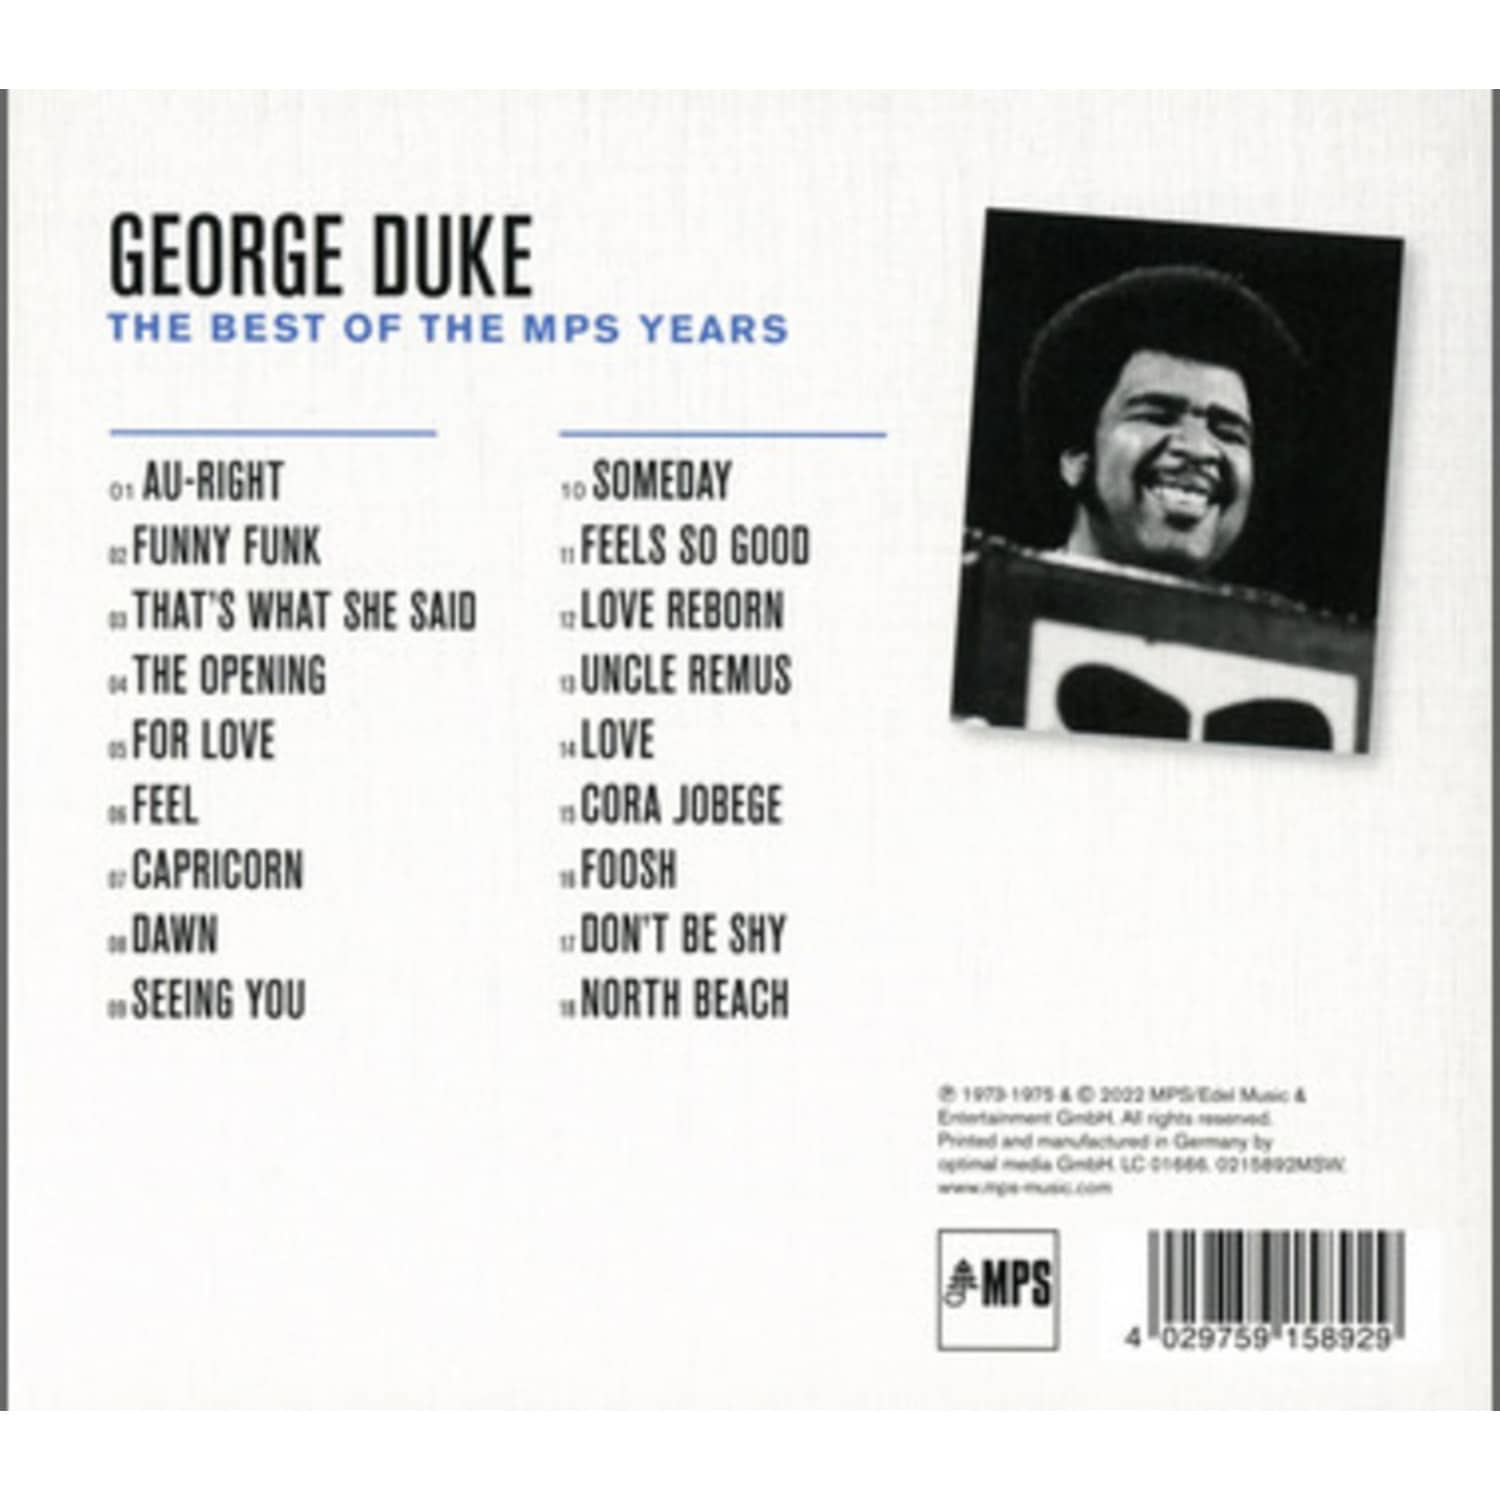 George Duke - THE BEST OF THE MPS YEARS 